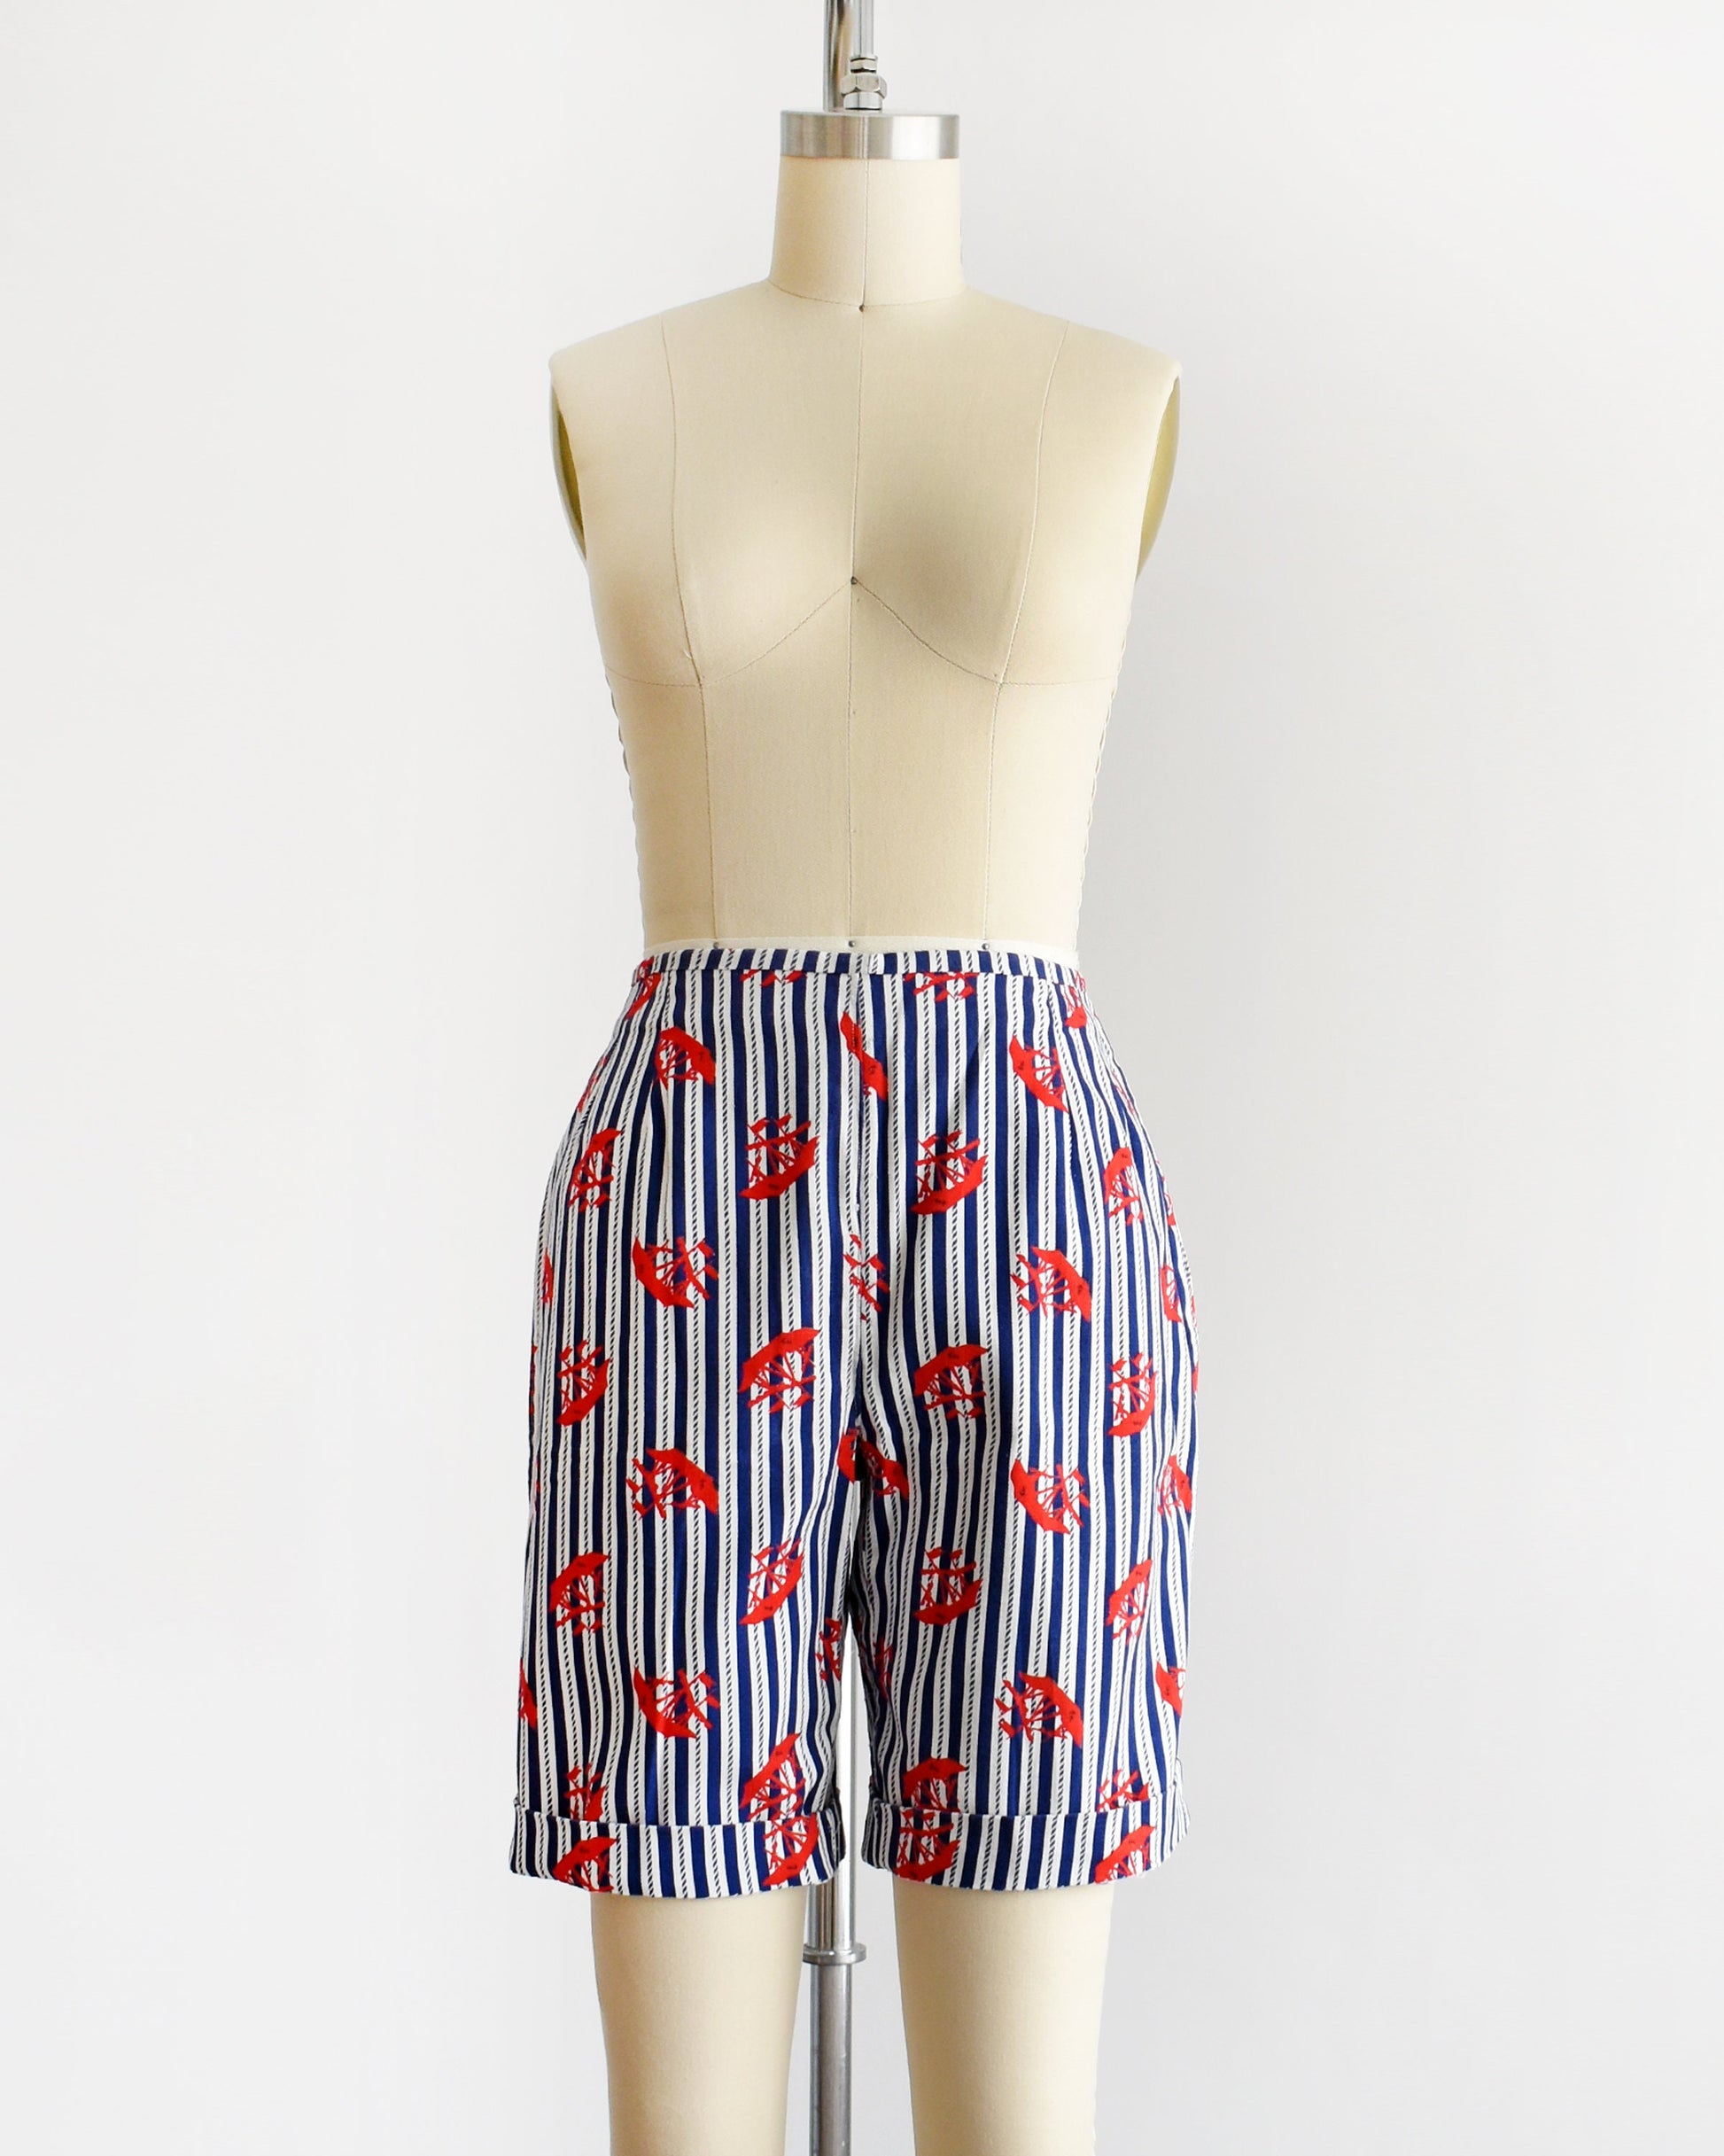 A pair of vintage 60s shorts that are navy blue and white vertical striped with a red clipper ship print. The shorts are modeled on a dress form. The shorts are cuffed in this photo